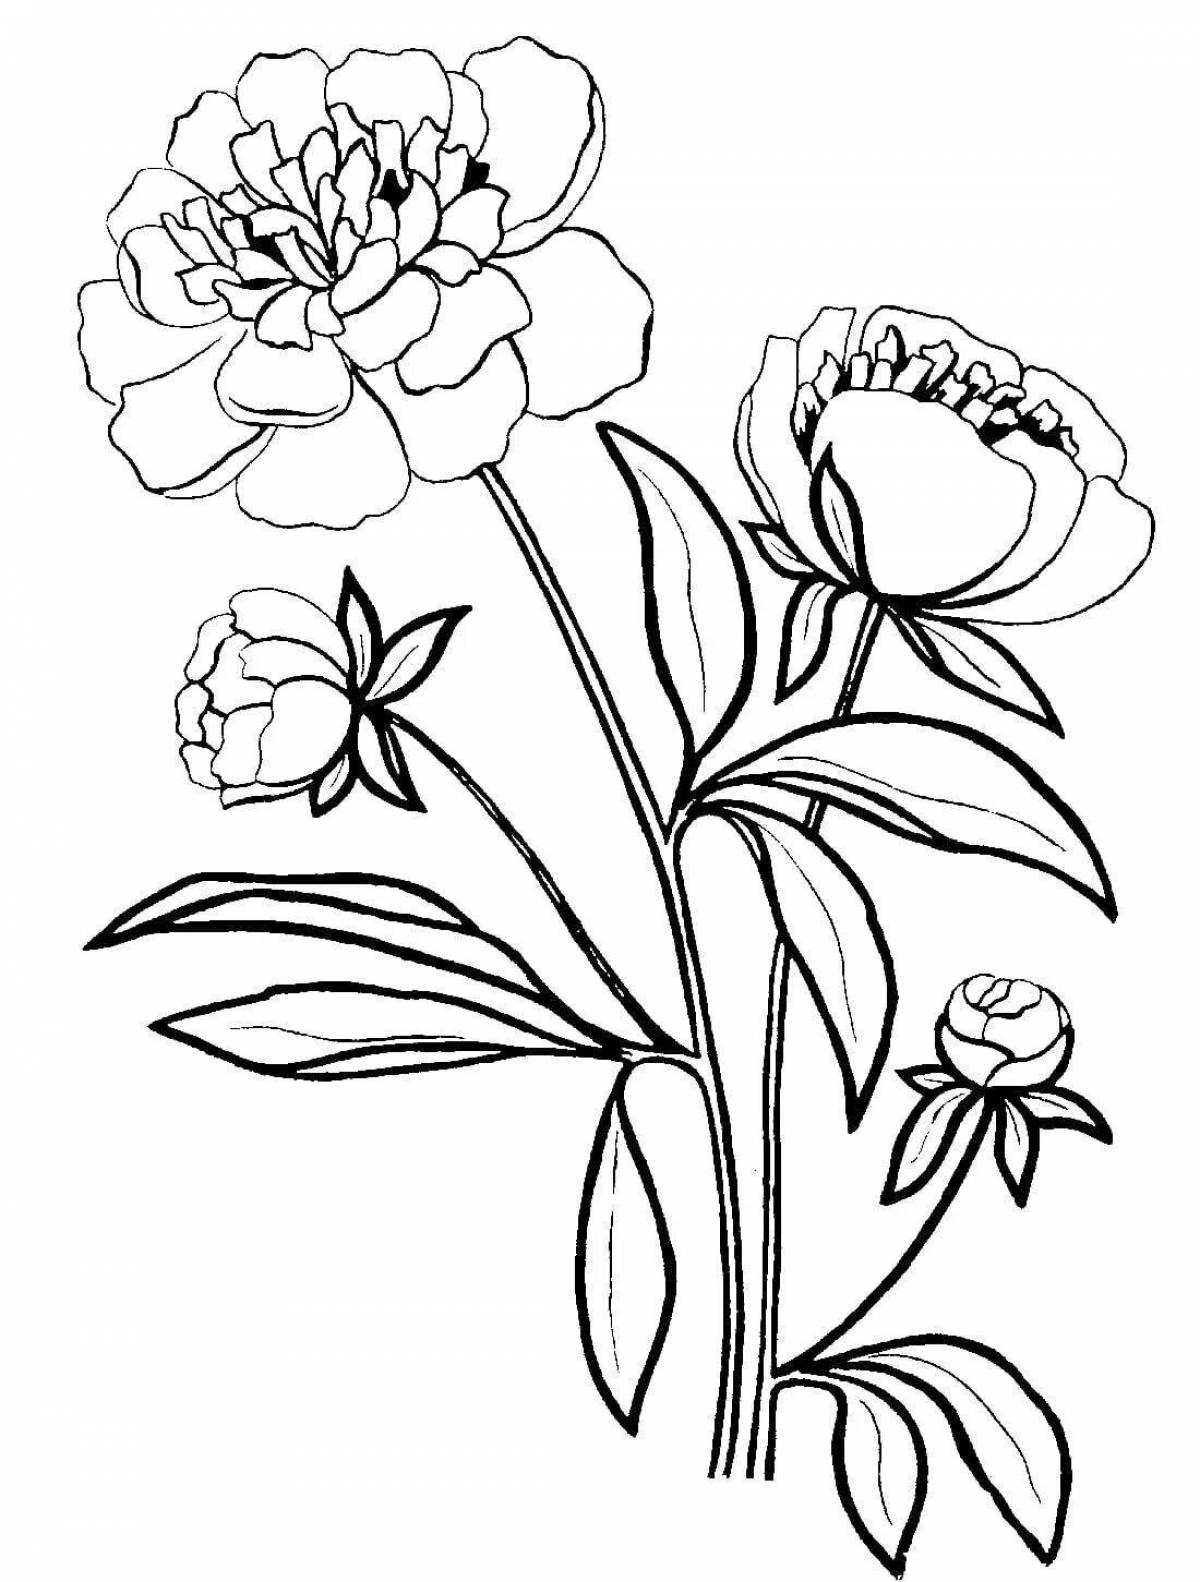 Adorable azure flower coloring page